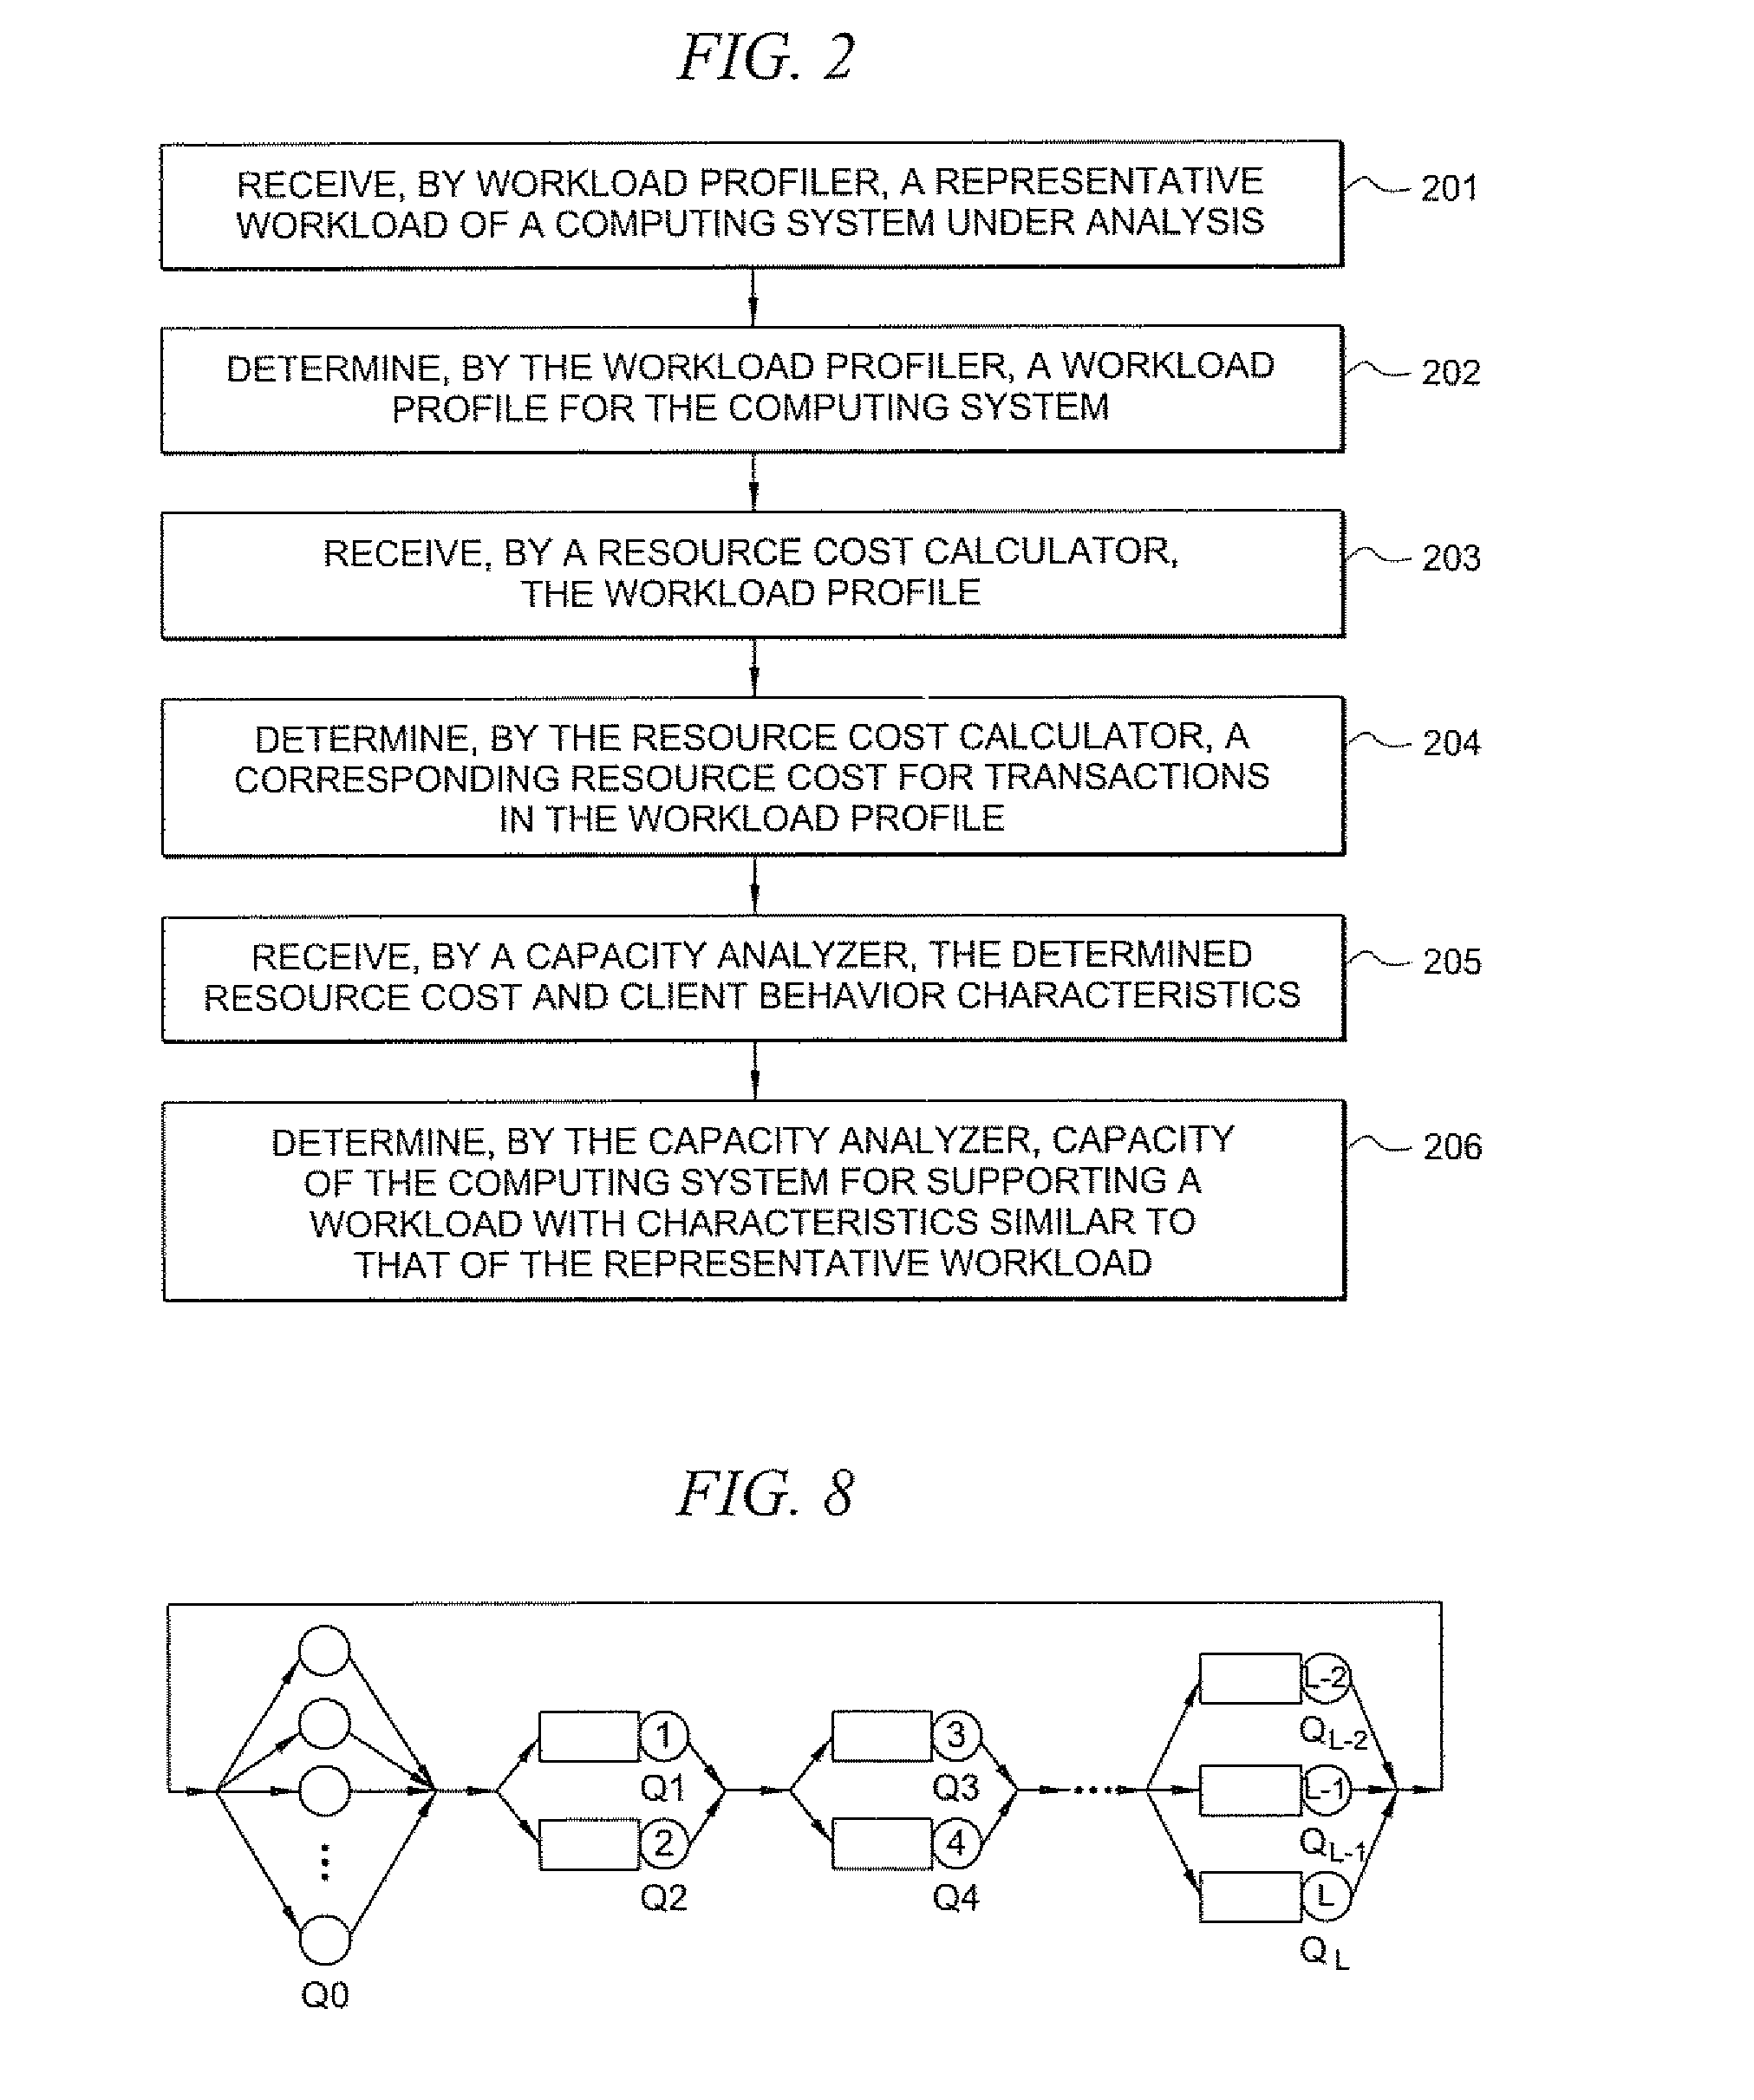 System and method for capacity planning for computing systems